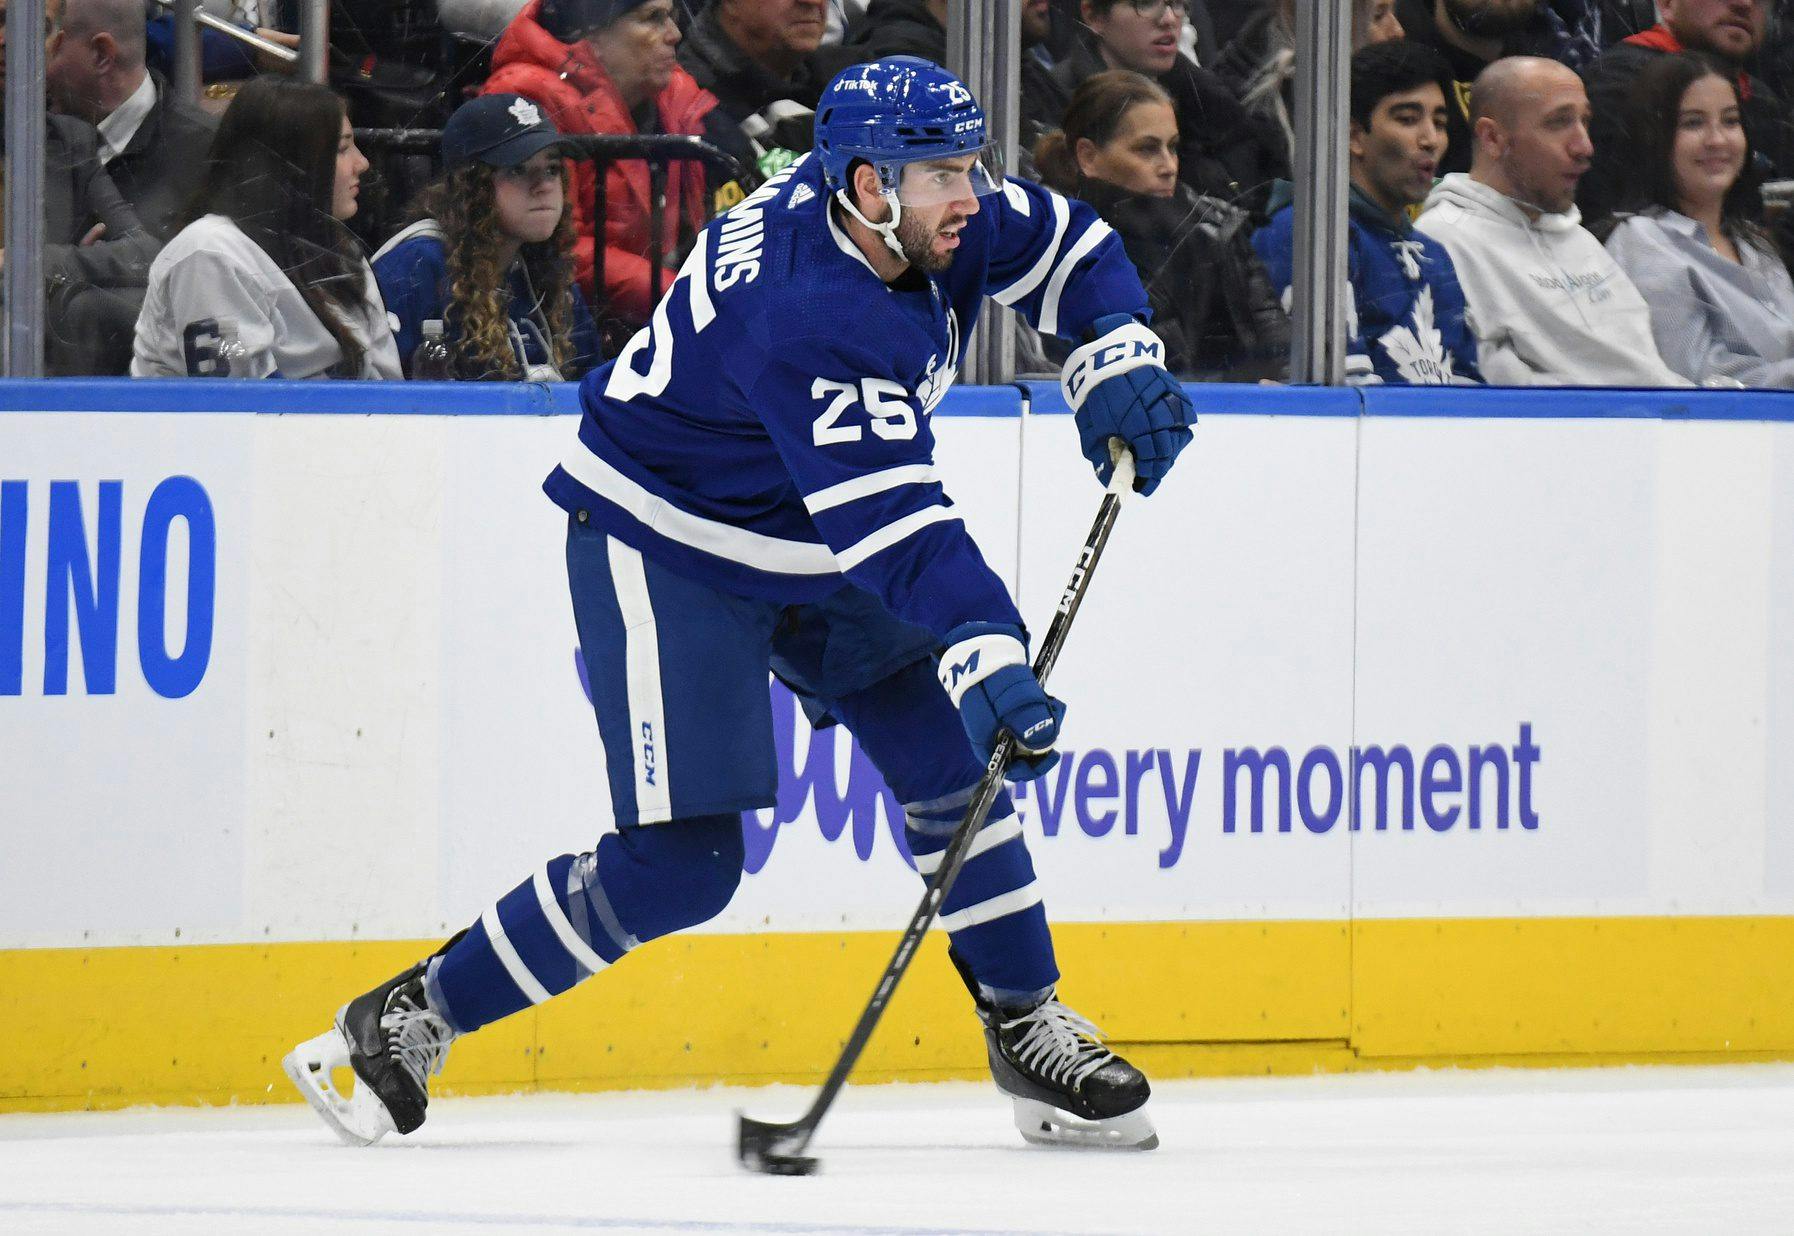 Maple Leafs’ defenseman Conor Timmins out with lower-body injury